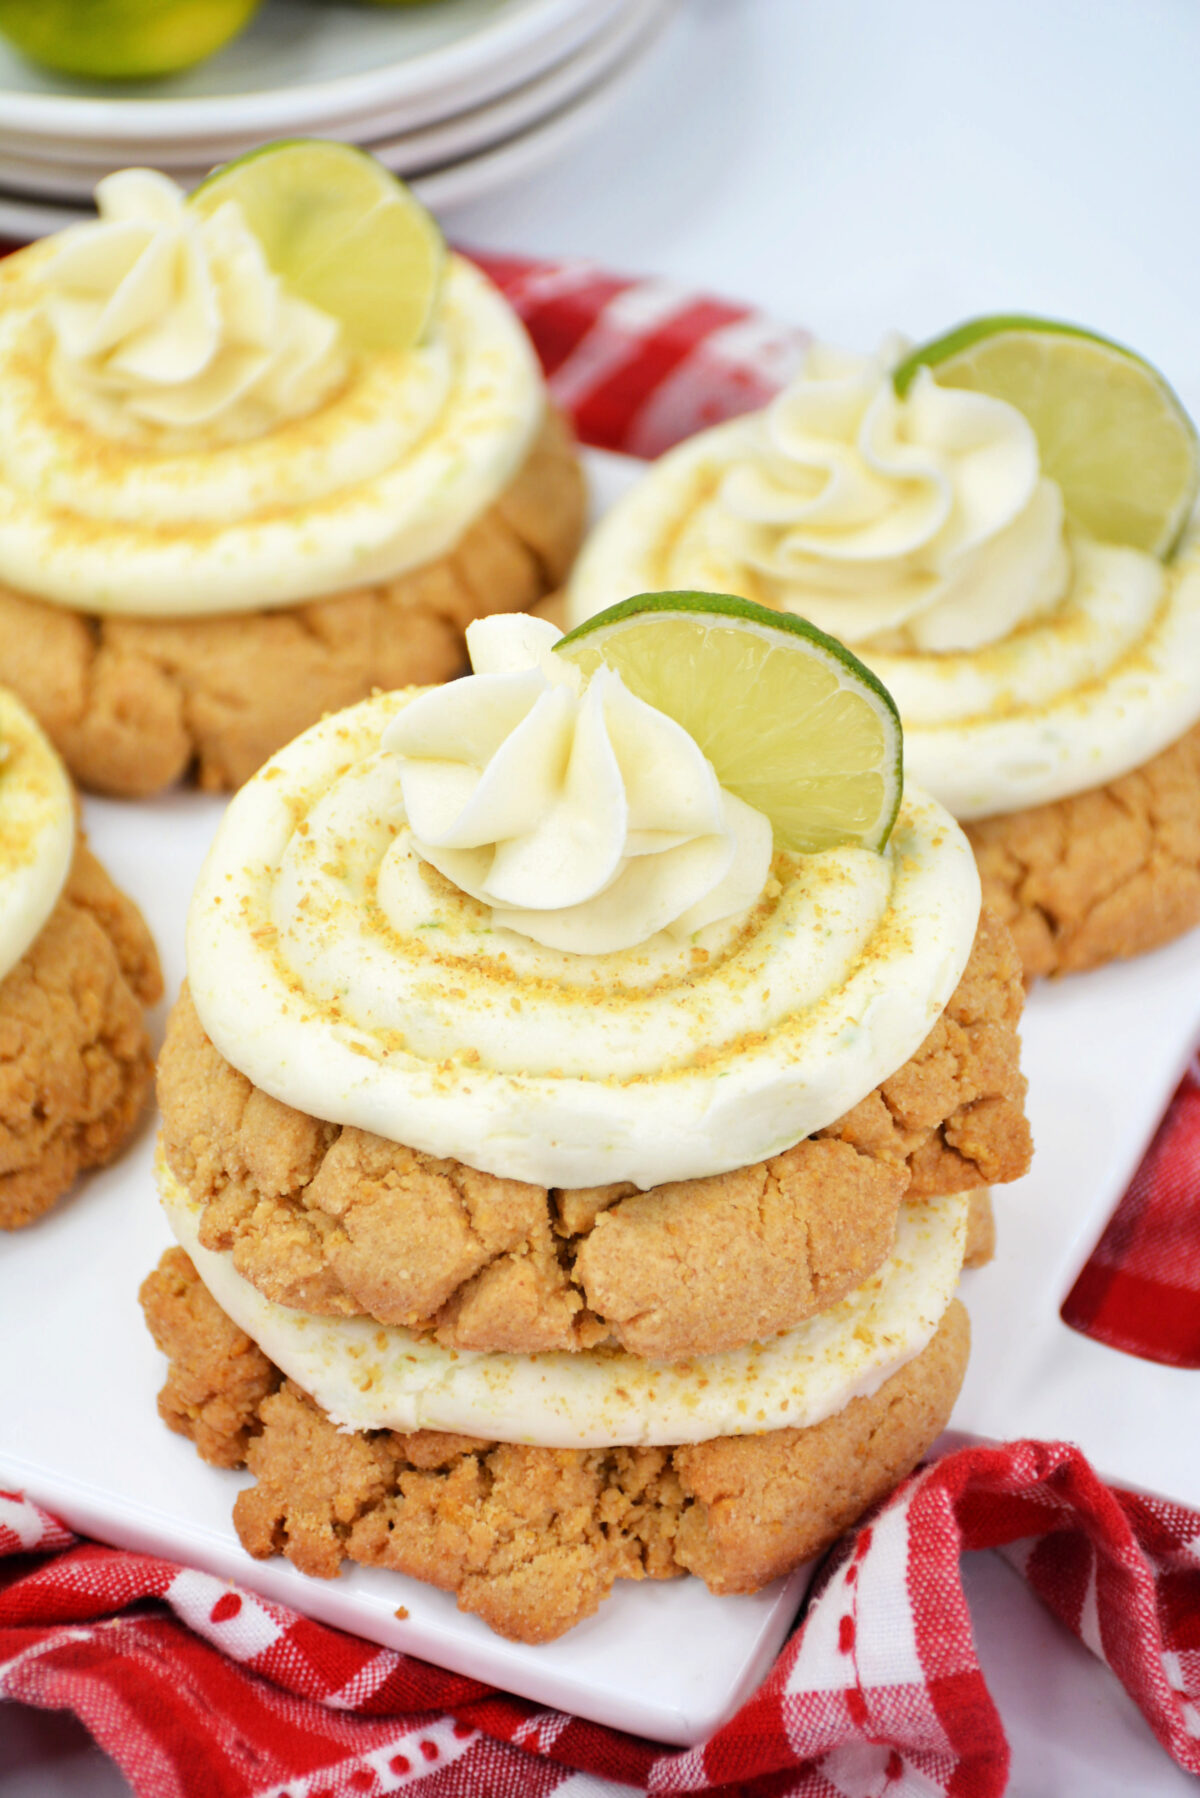 Make your own Crumbl Key Lime Pie Cookies from the comfort of your home with this easy copycat recipe of the beloved cookies